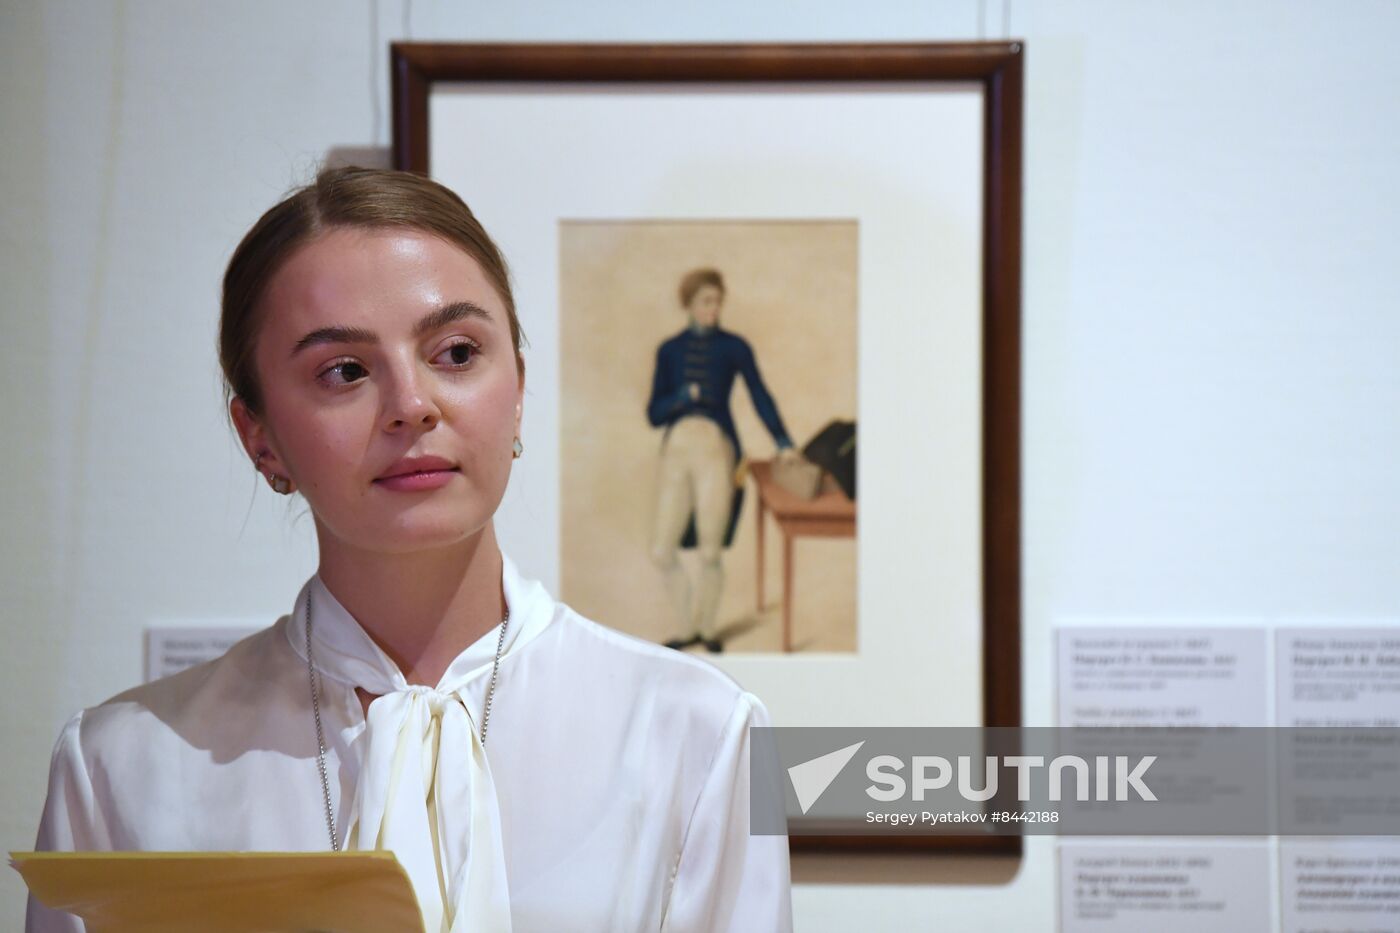 Russia Art Academic Drawing Exhibition